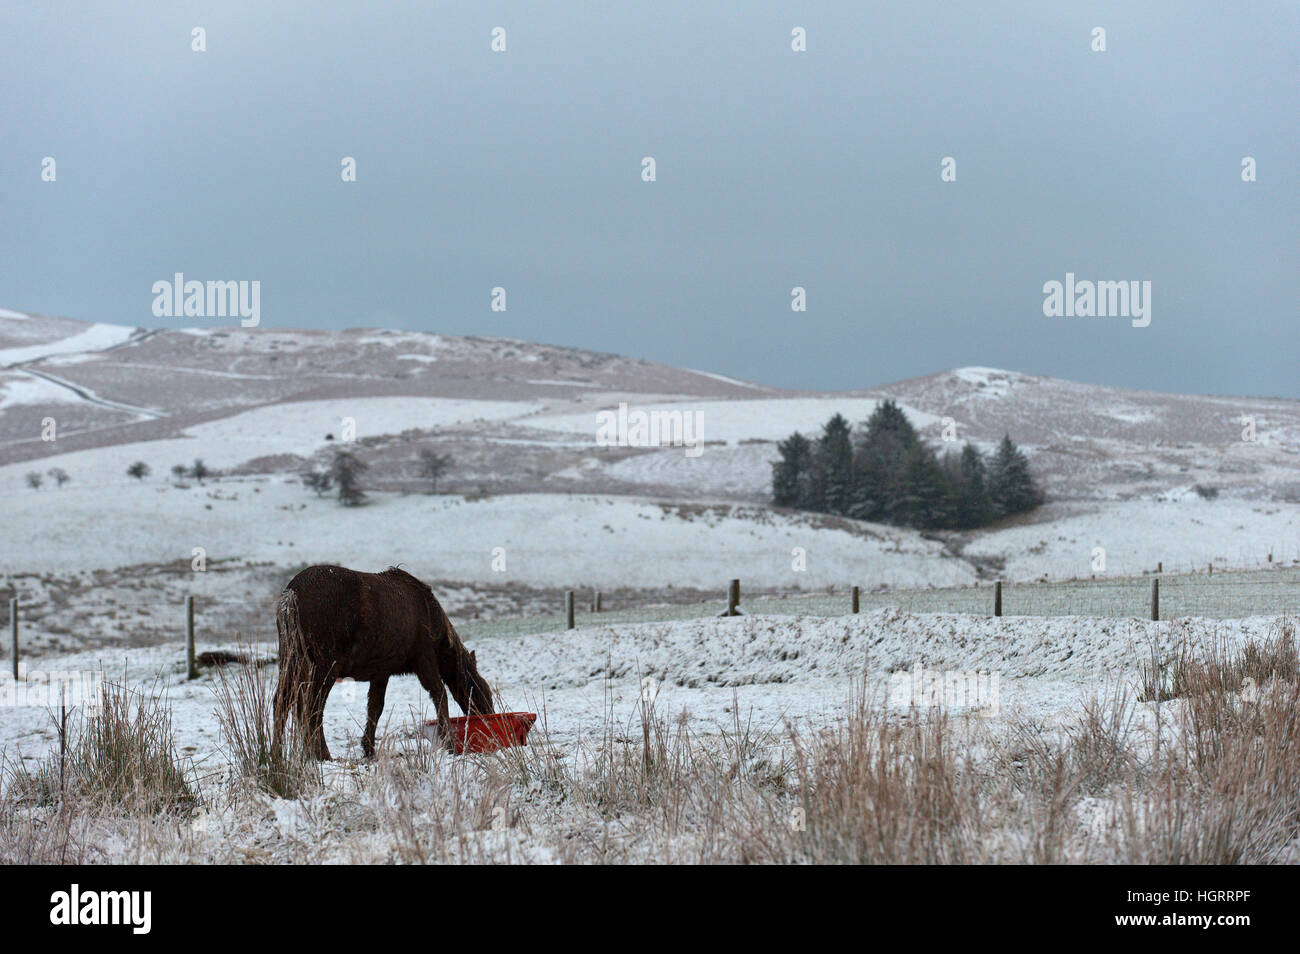 Builth Wells, Powys, Wales, UK. 12th January 2017.  Young Welsh pony feeds in a wintry landscape on the high moorland of the Mynydd Epynt range near Builth Wells in Powys, Mid Wales, UK. © Graham M. Lawrence/Alamy Live News. Stock Photo